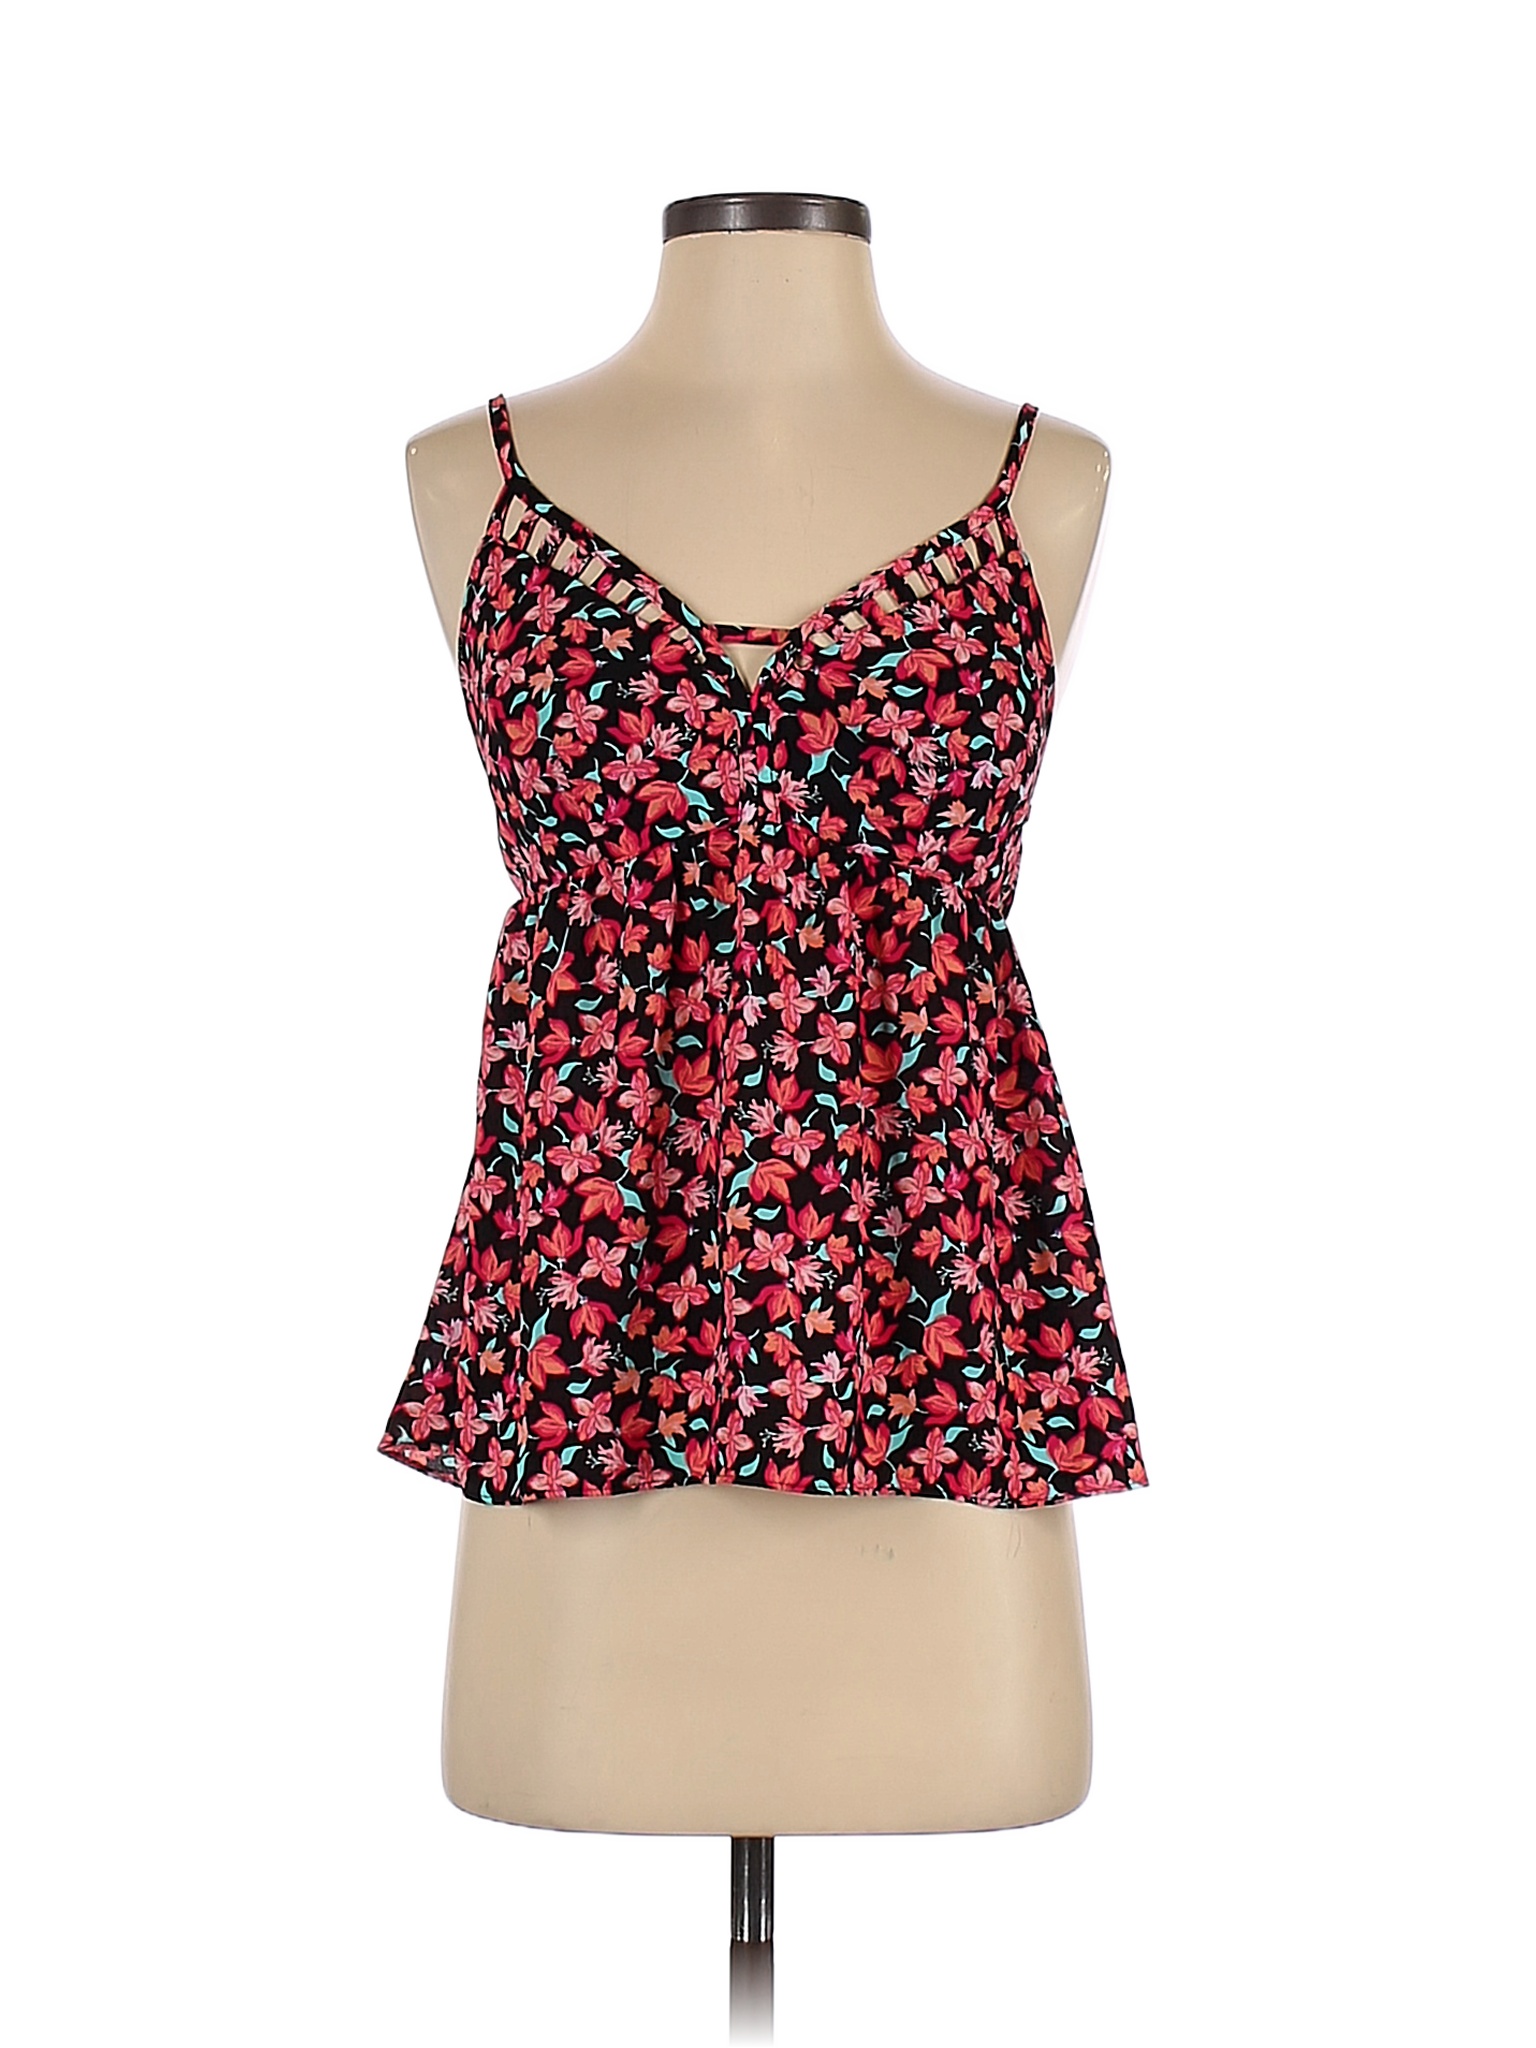 Candie's 100% Polyester Floral Red Sleeveless Blouse Size M - 63% off ...